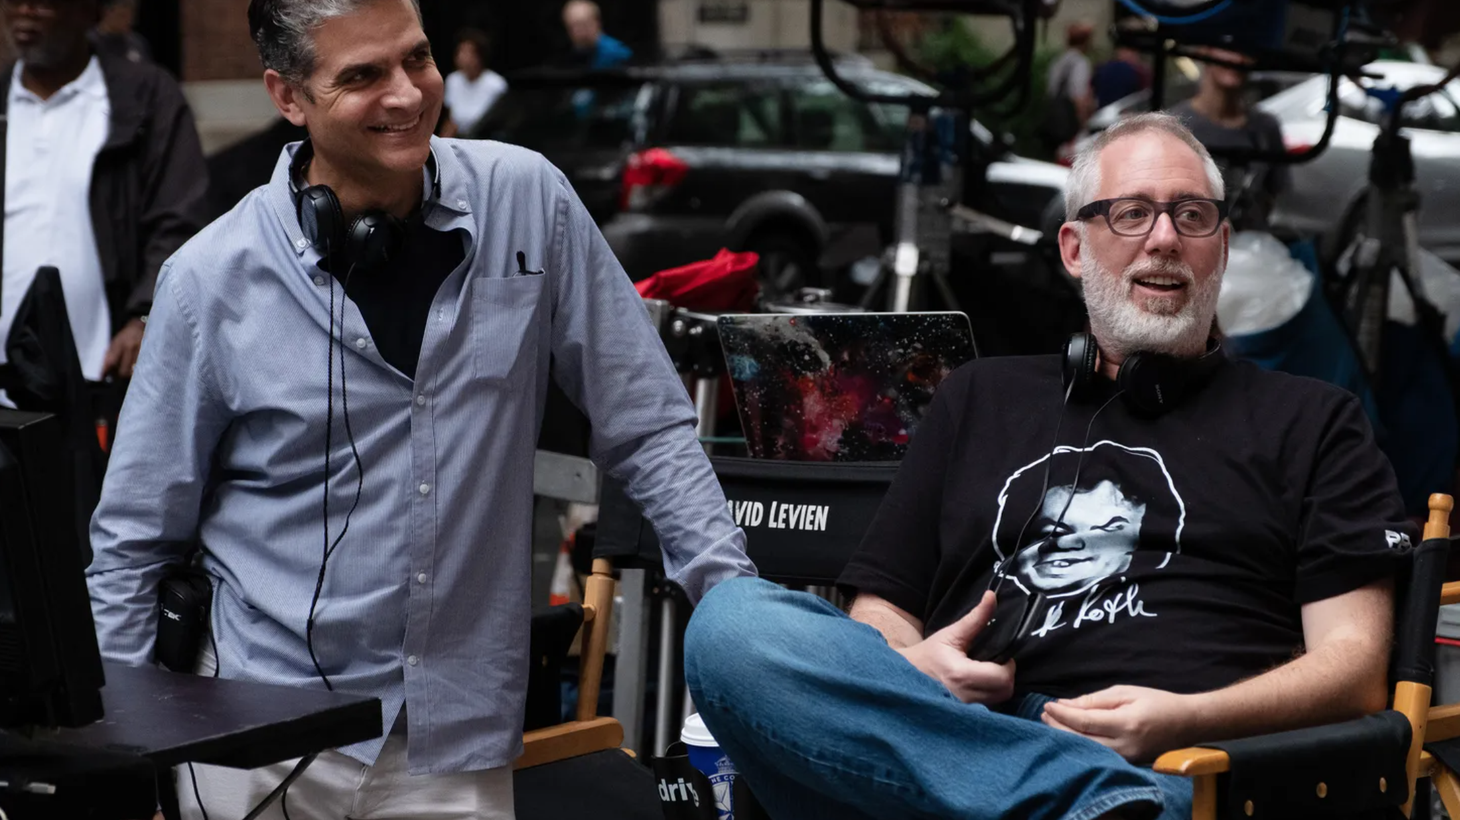 Behind-the-scenes (L-R): Executive Producer and Writer David Levien and Executive Producer and Writer Brian Koppelman on the set of “Billions” season 3.